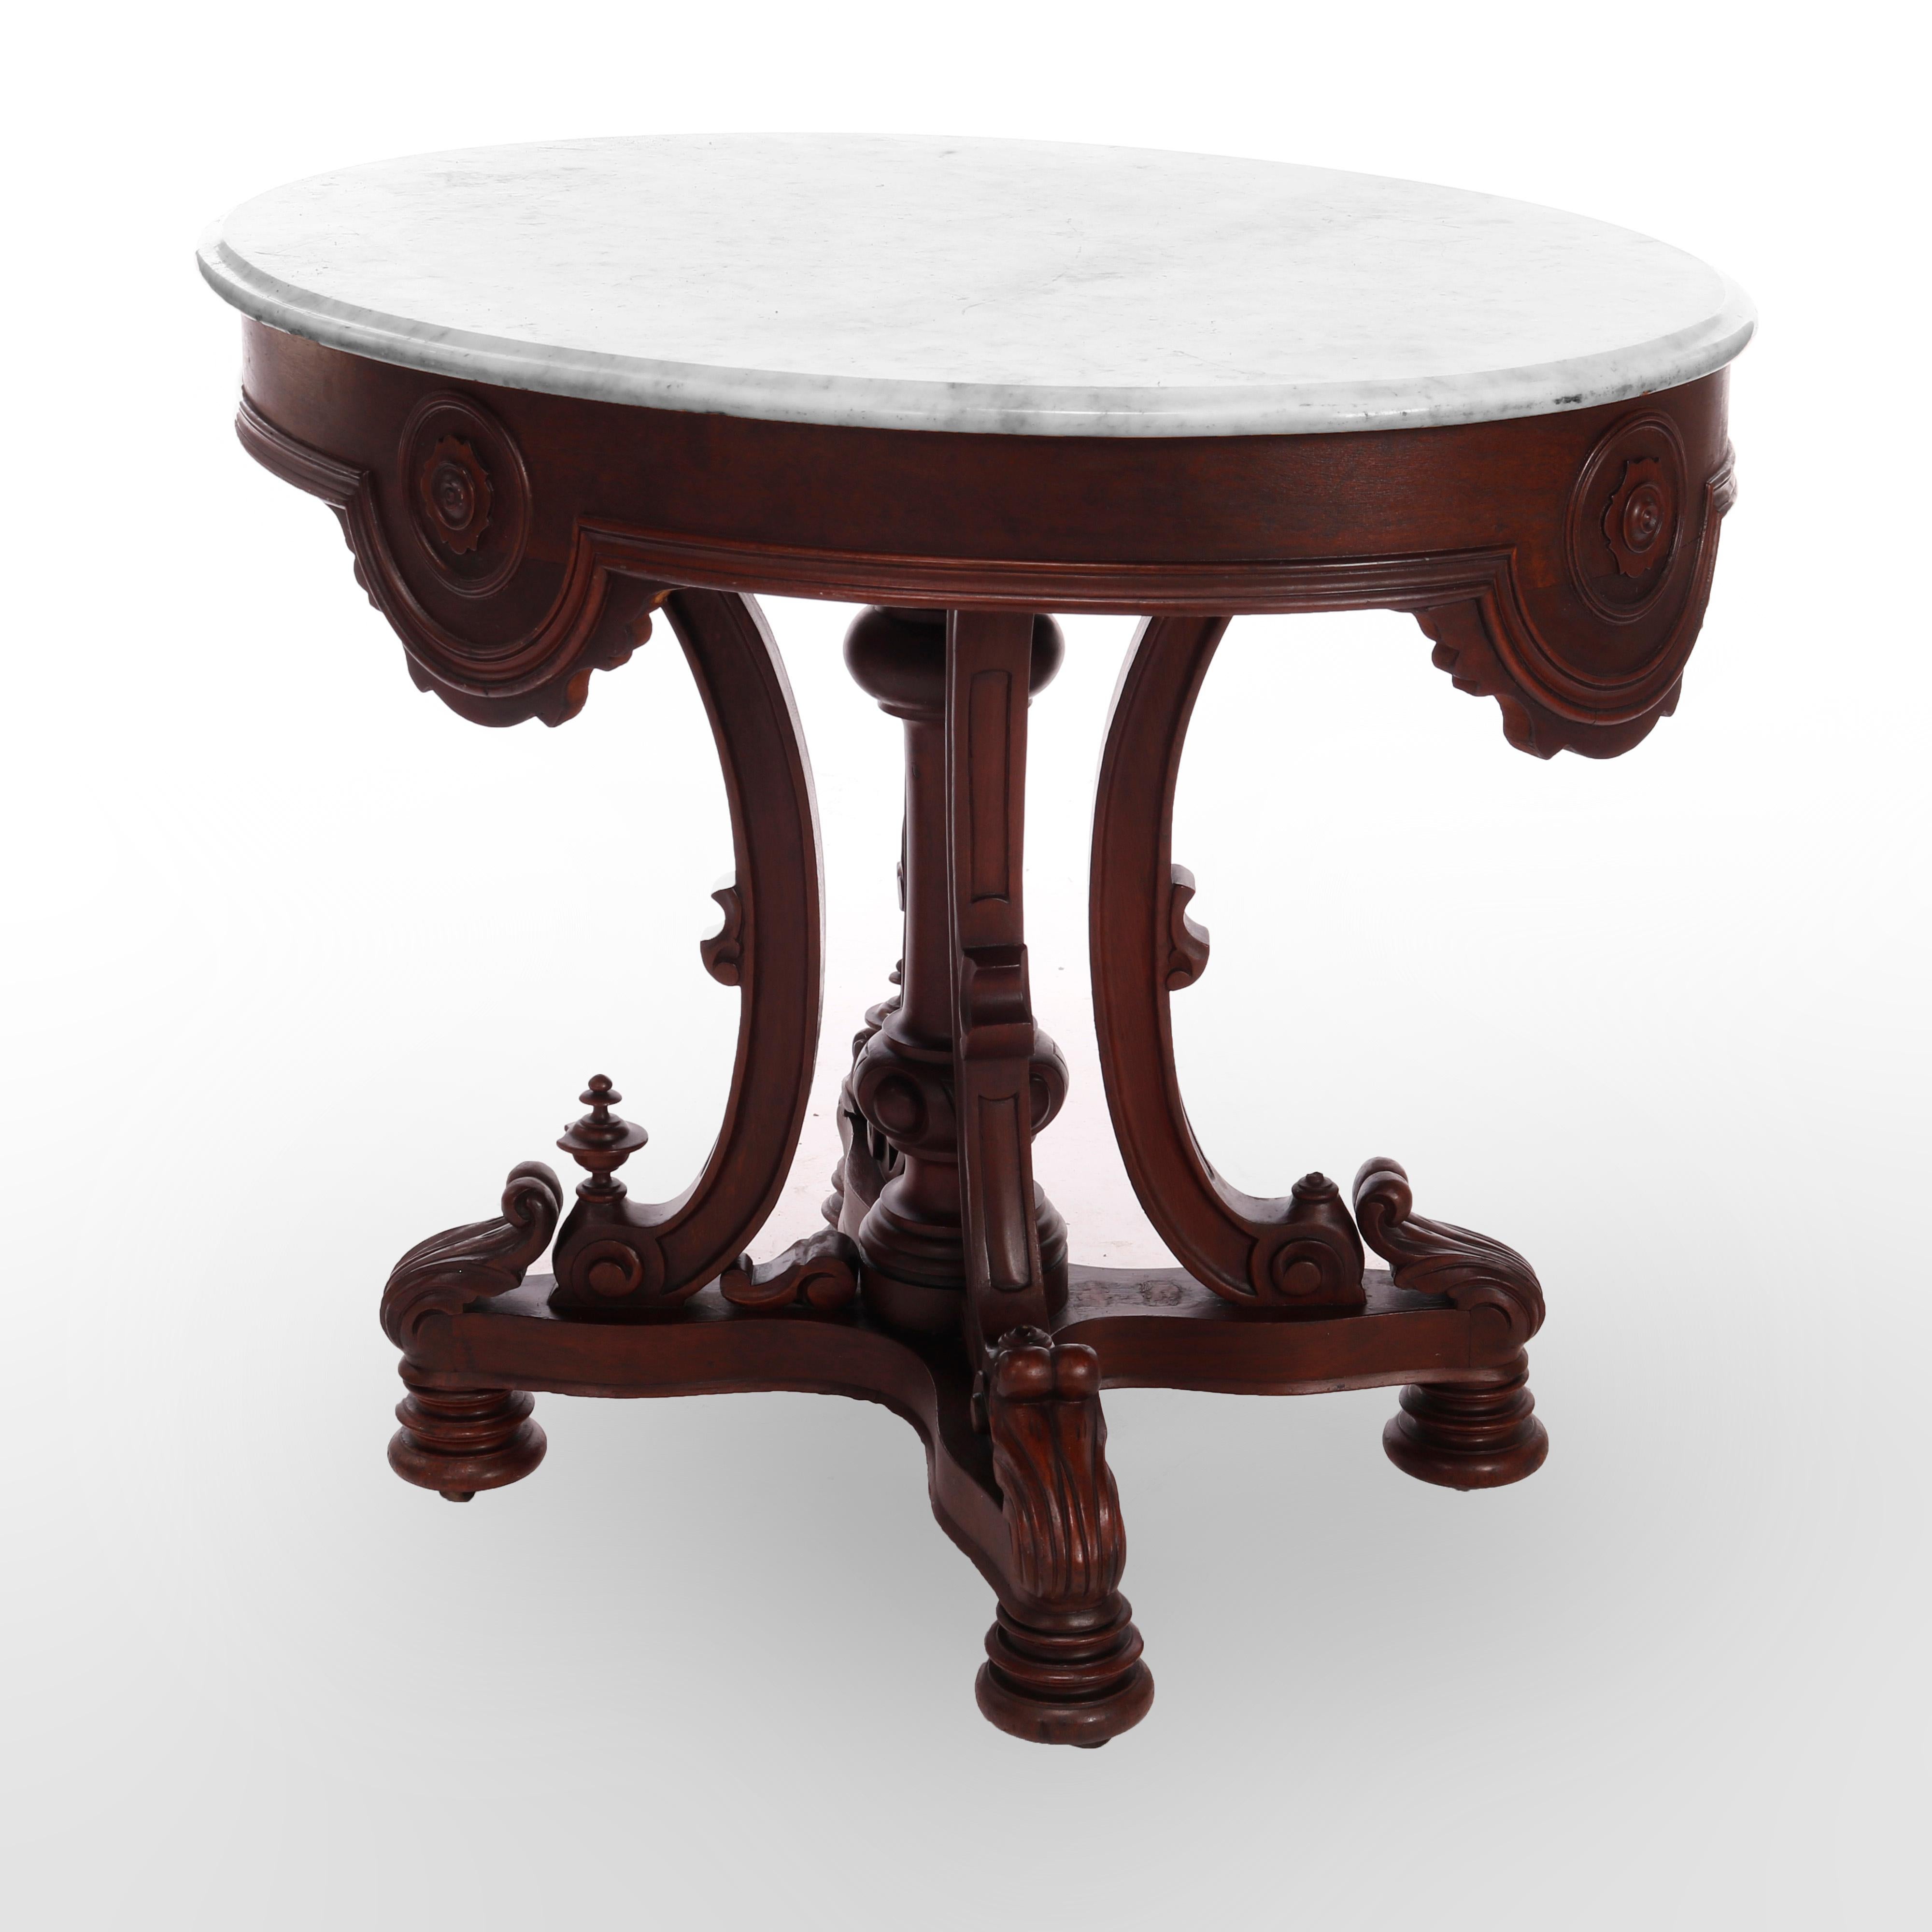 Antique Rococo Revival Carved Rosewood Oval Marble Top Table, Circa 1870 1